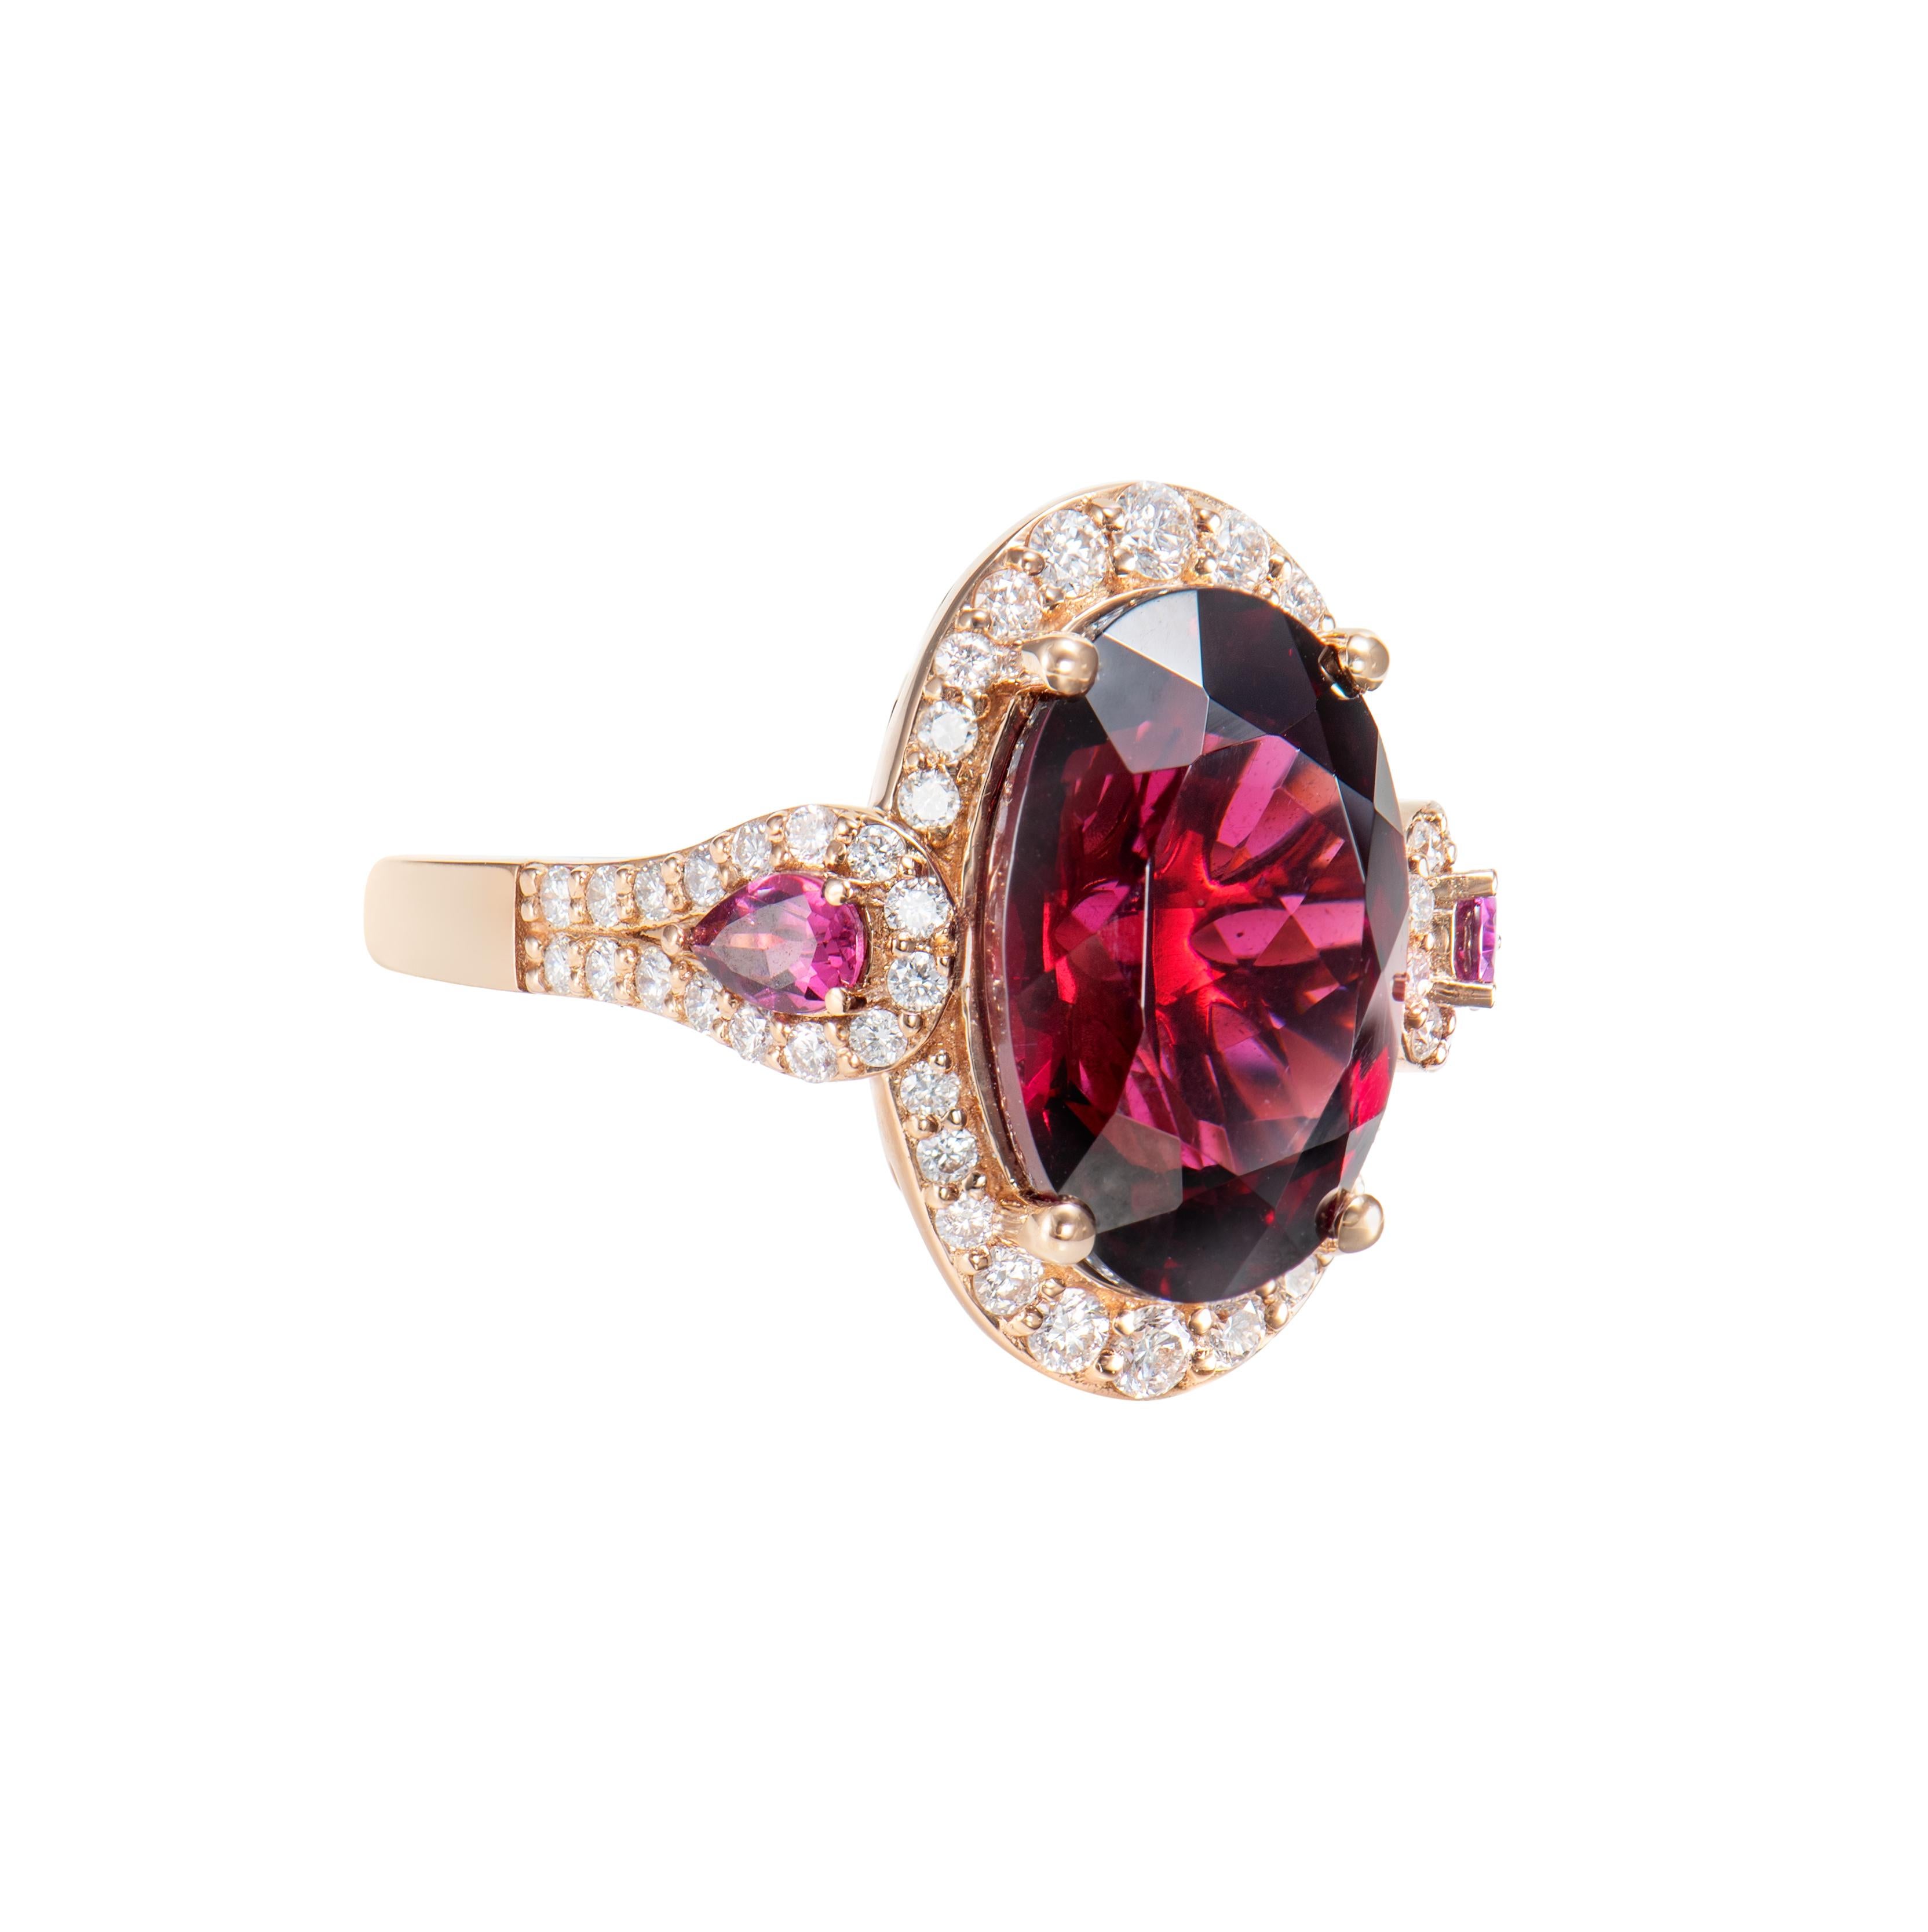 Celebrating Magenta as the color of the year for 2023, we present our exclusive Radiating Rhodolite collection. The magnificent magenta hues in these gems are brought to life in a classic rose gold setting with white diamonds.

Rhodolite and White